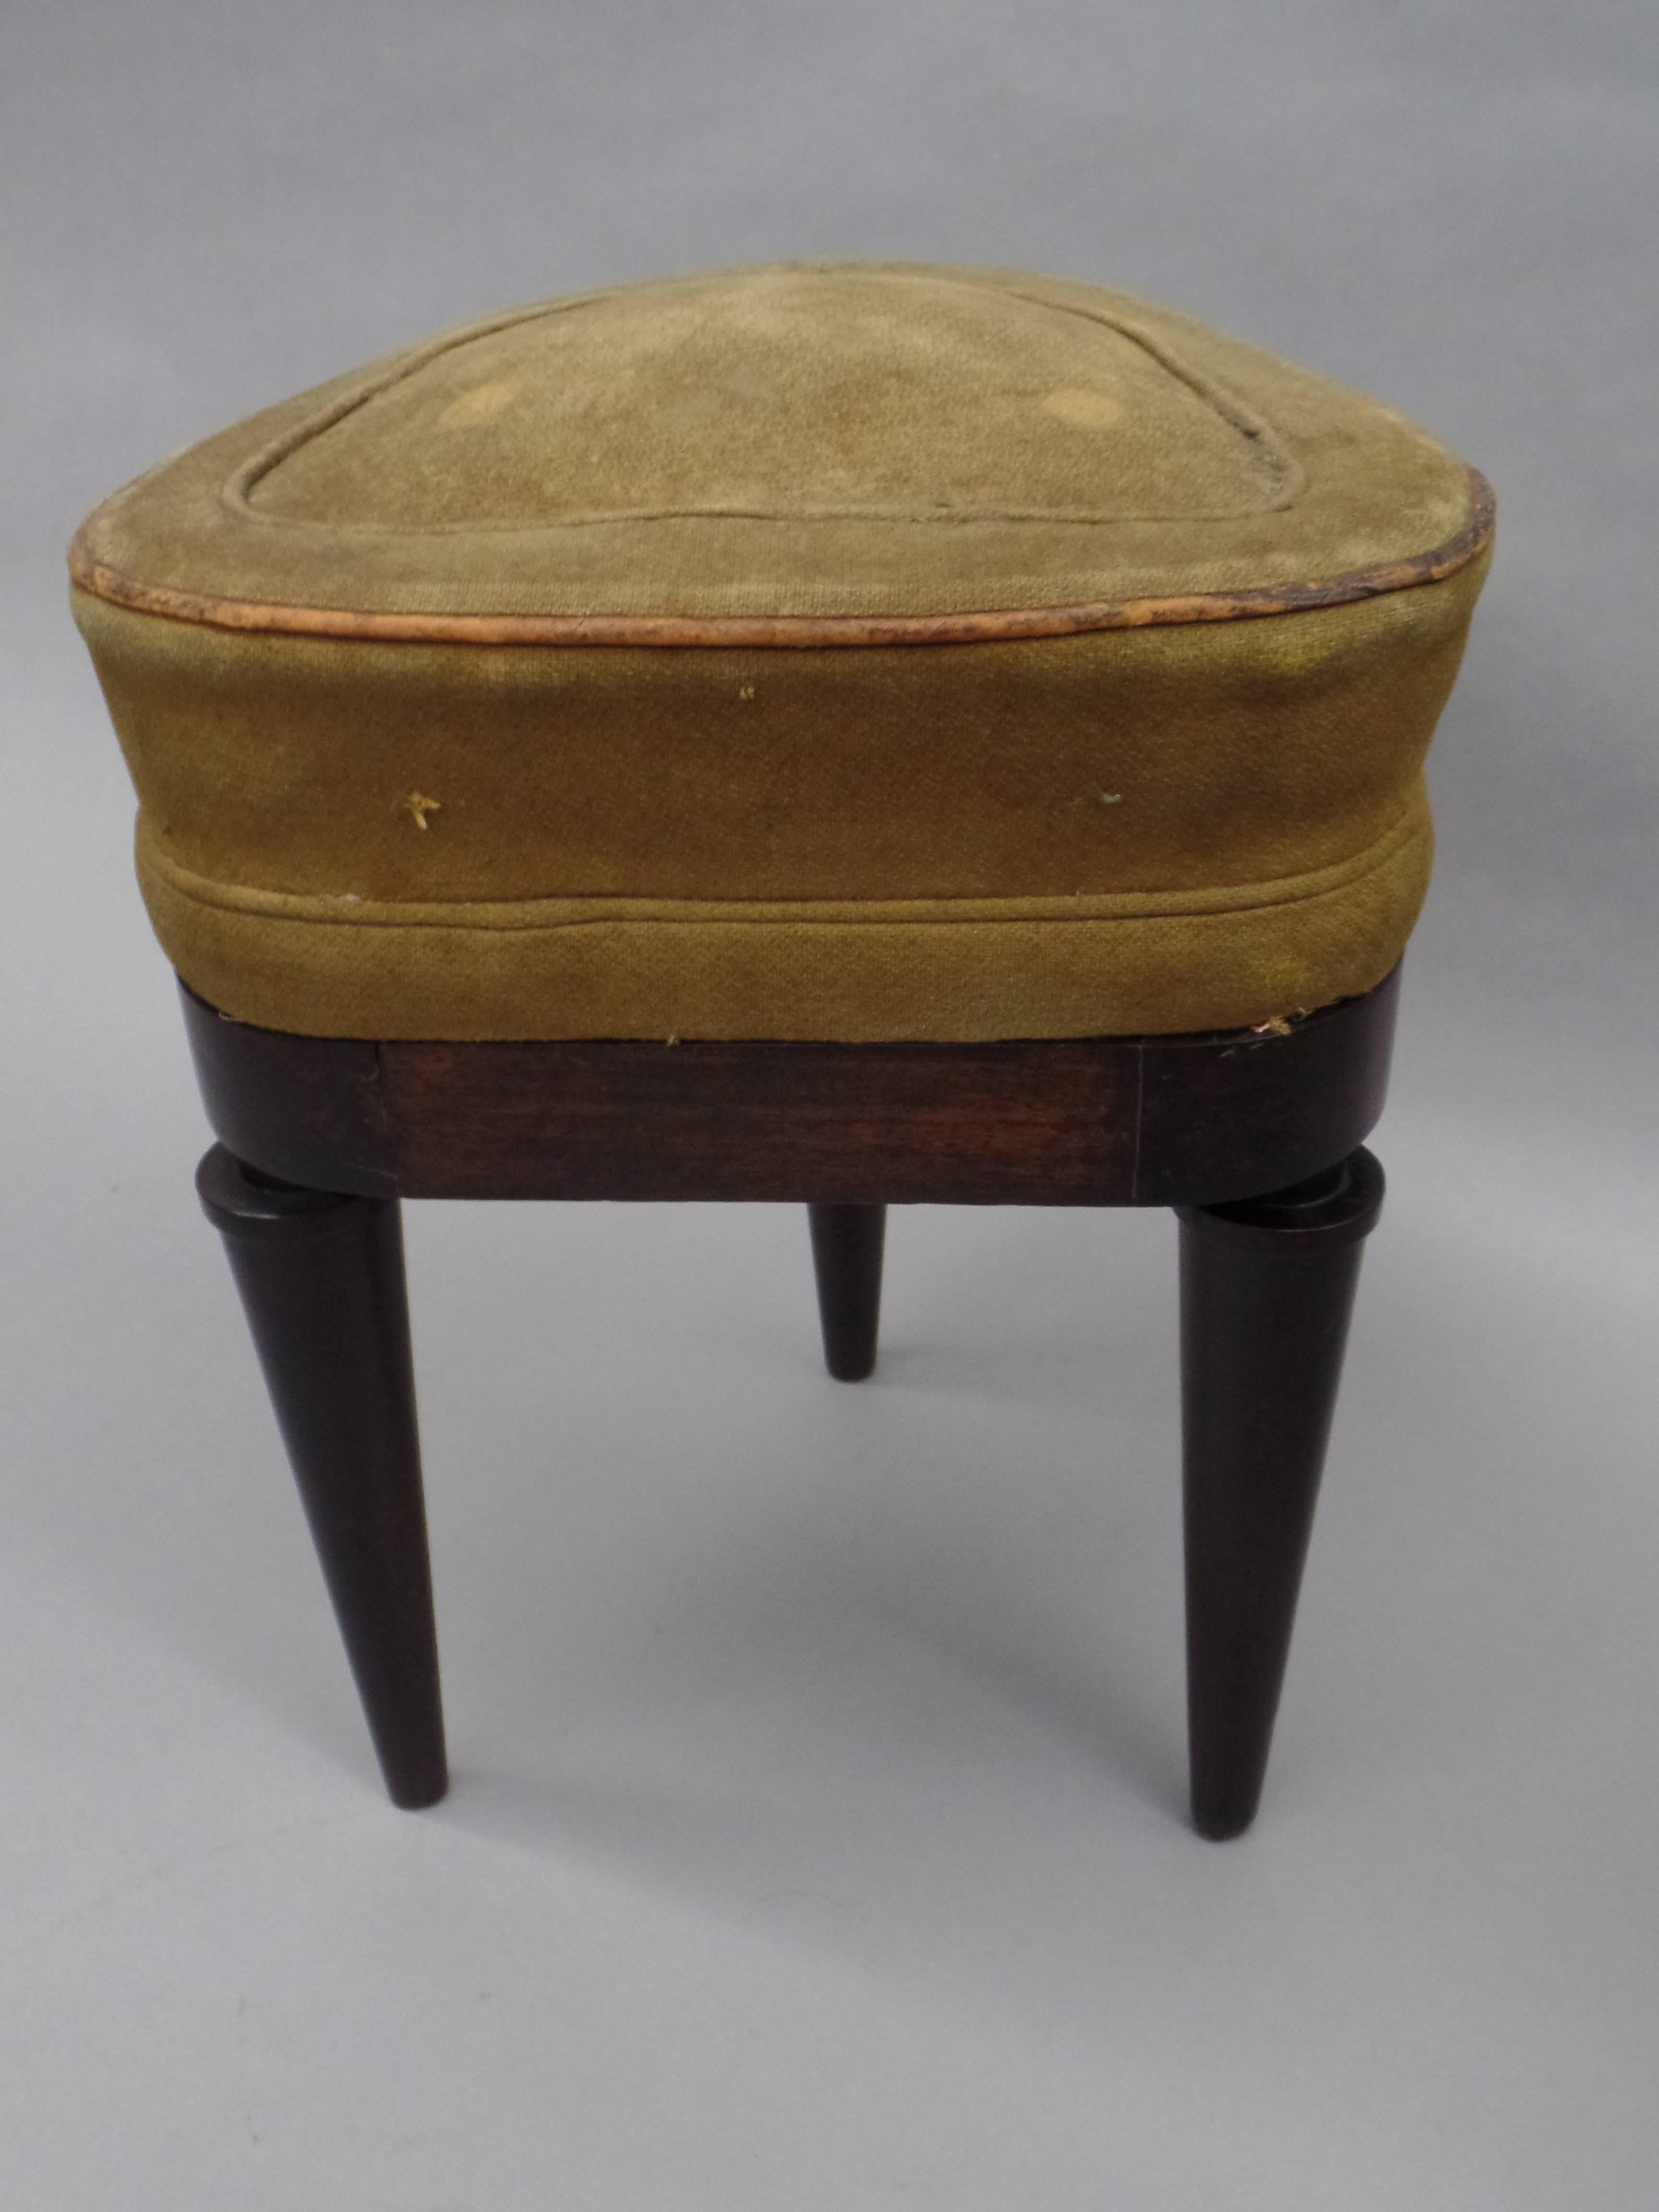 French Modern Neoclassical Mahogany and Suede Tri-Corner Stools, Andre Arbus In Good Condition For Sale In New York, NY